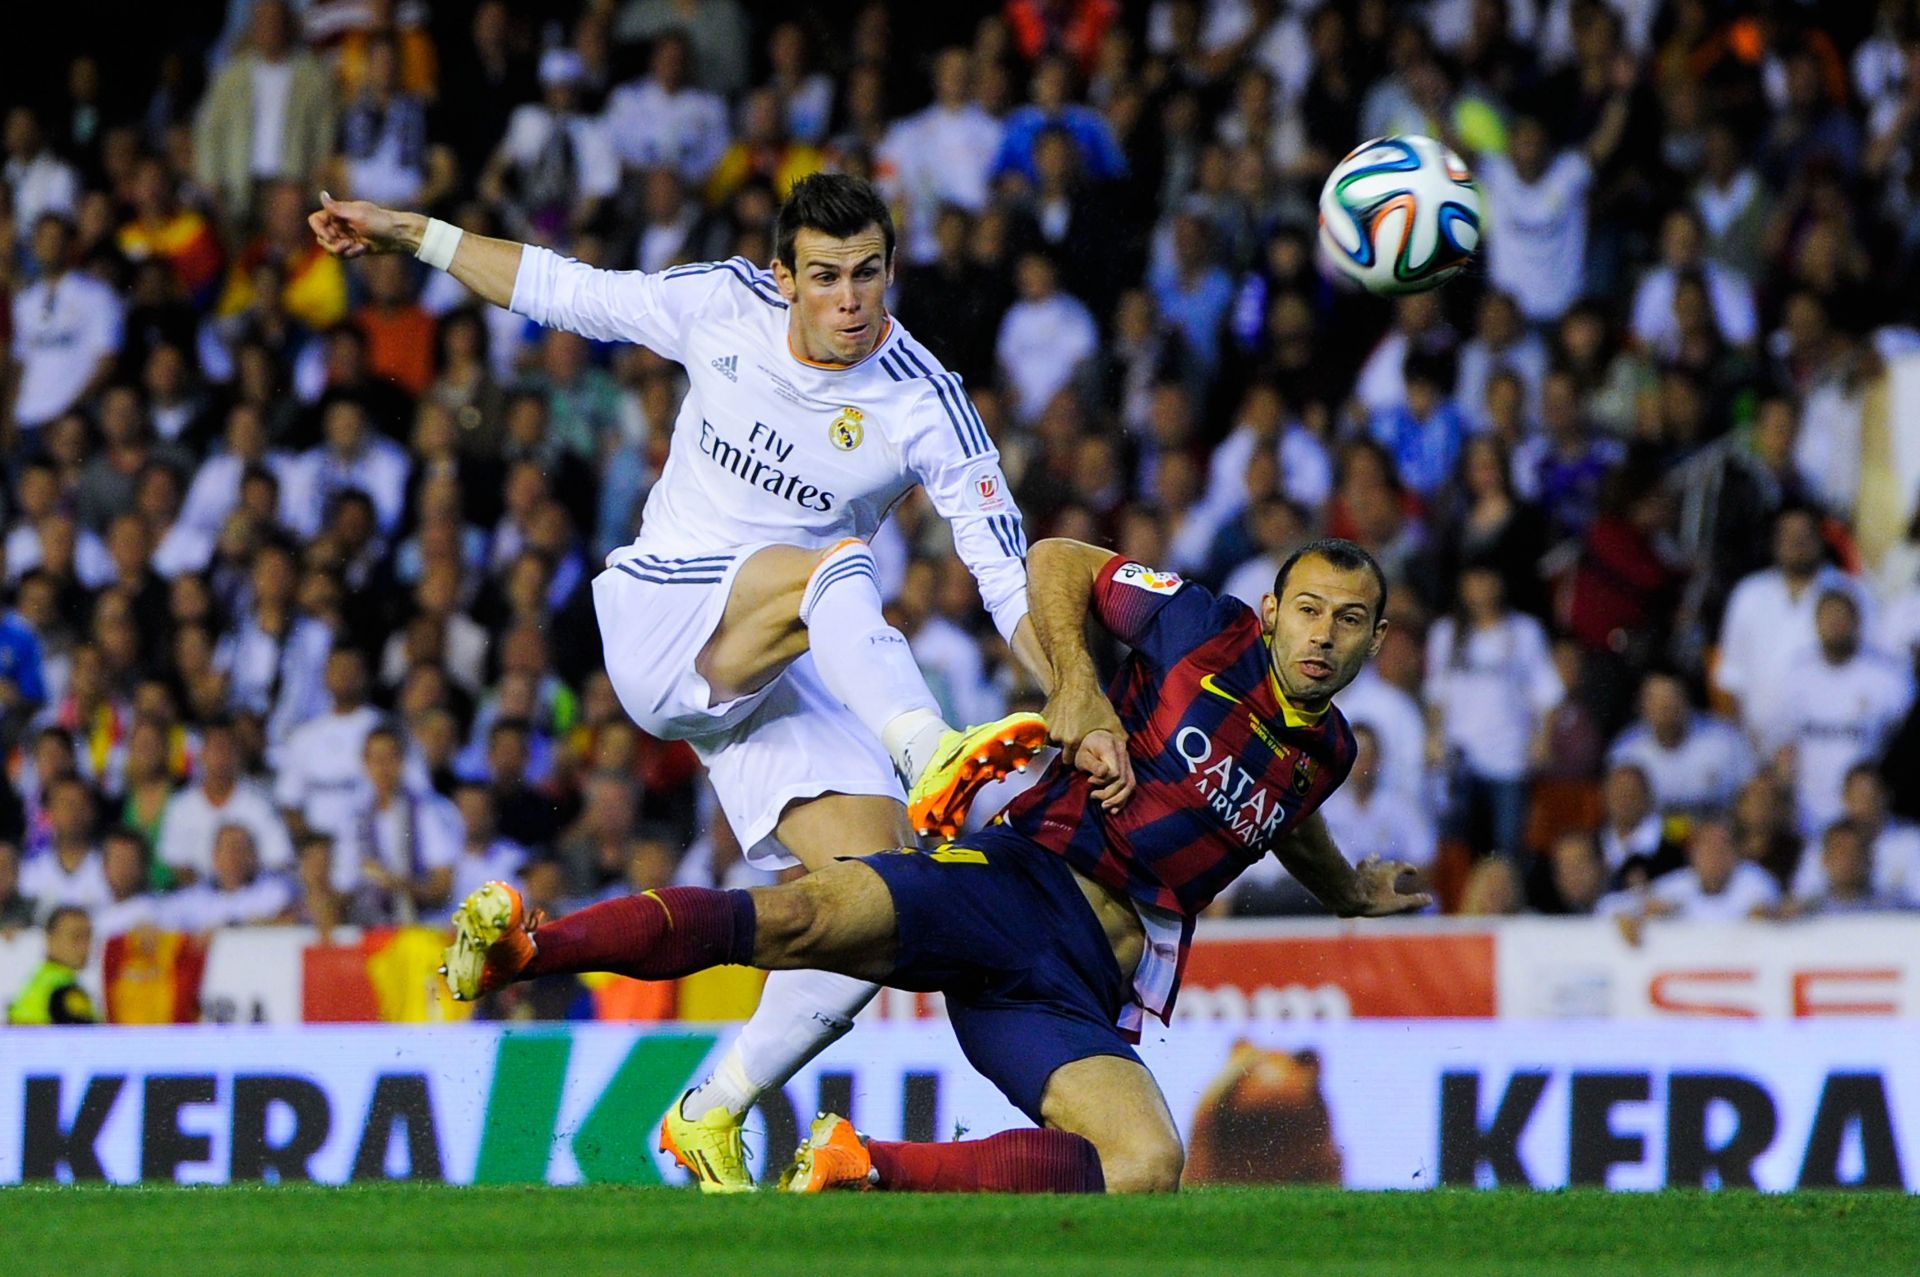 Gareth Bale inked his name in El Clasico history with his spectacular performance in this clash.